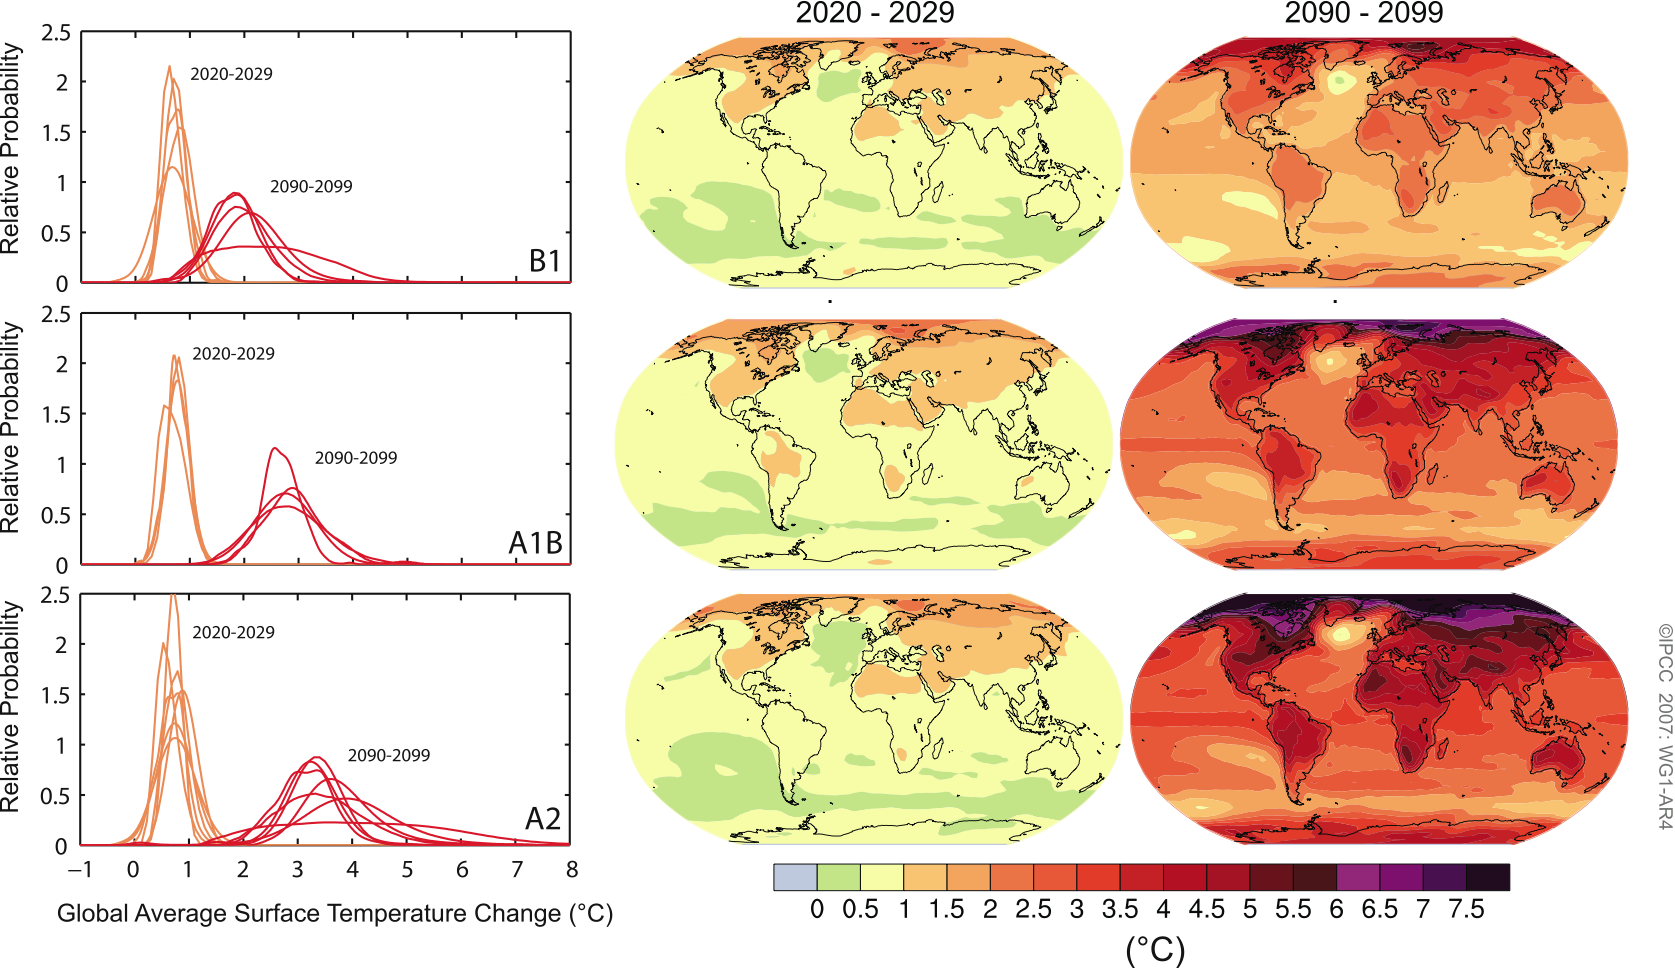 IPCC projections of the surface temperature changes for two